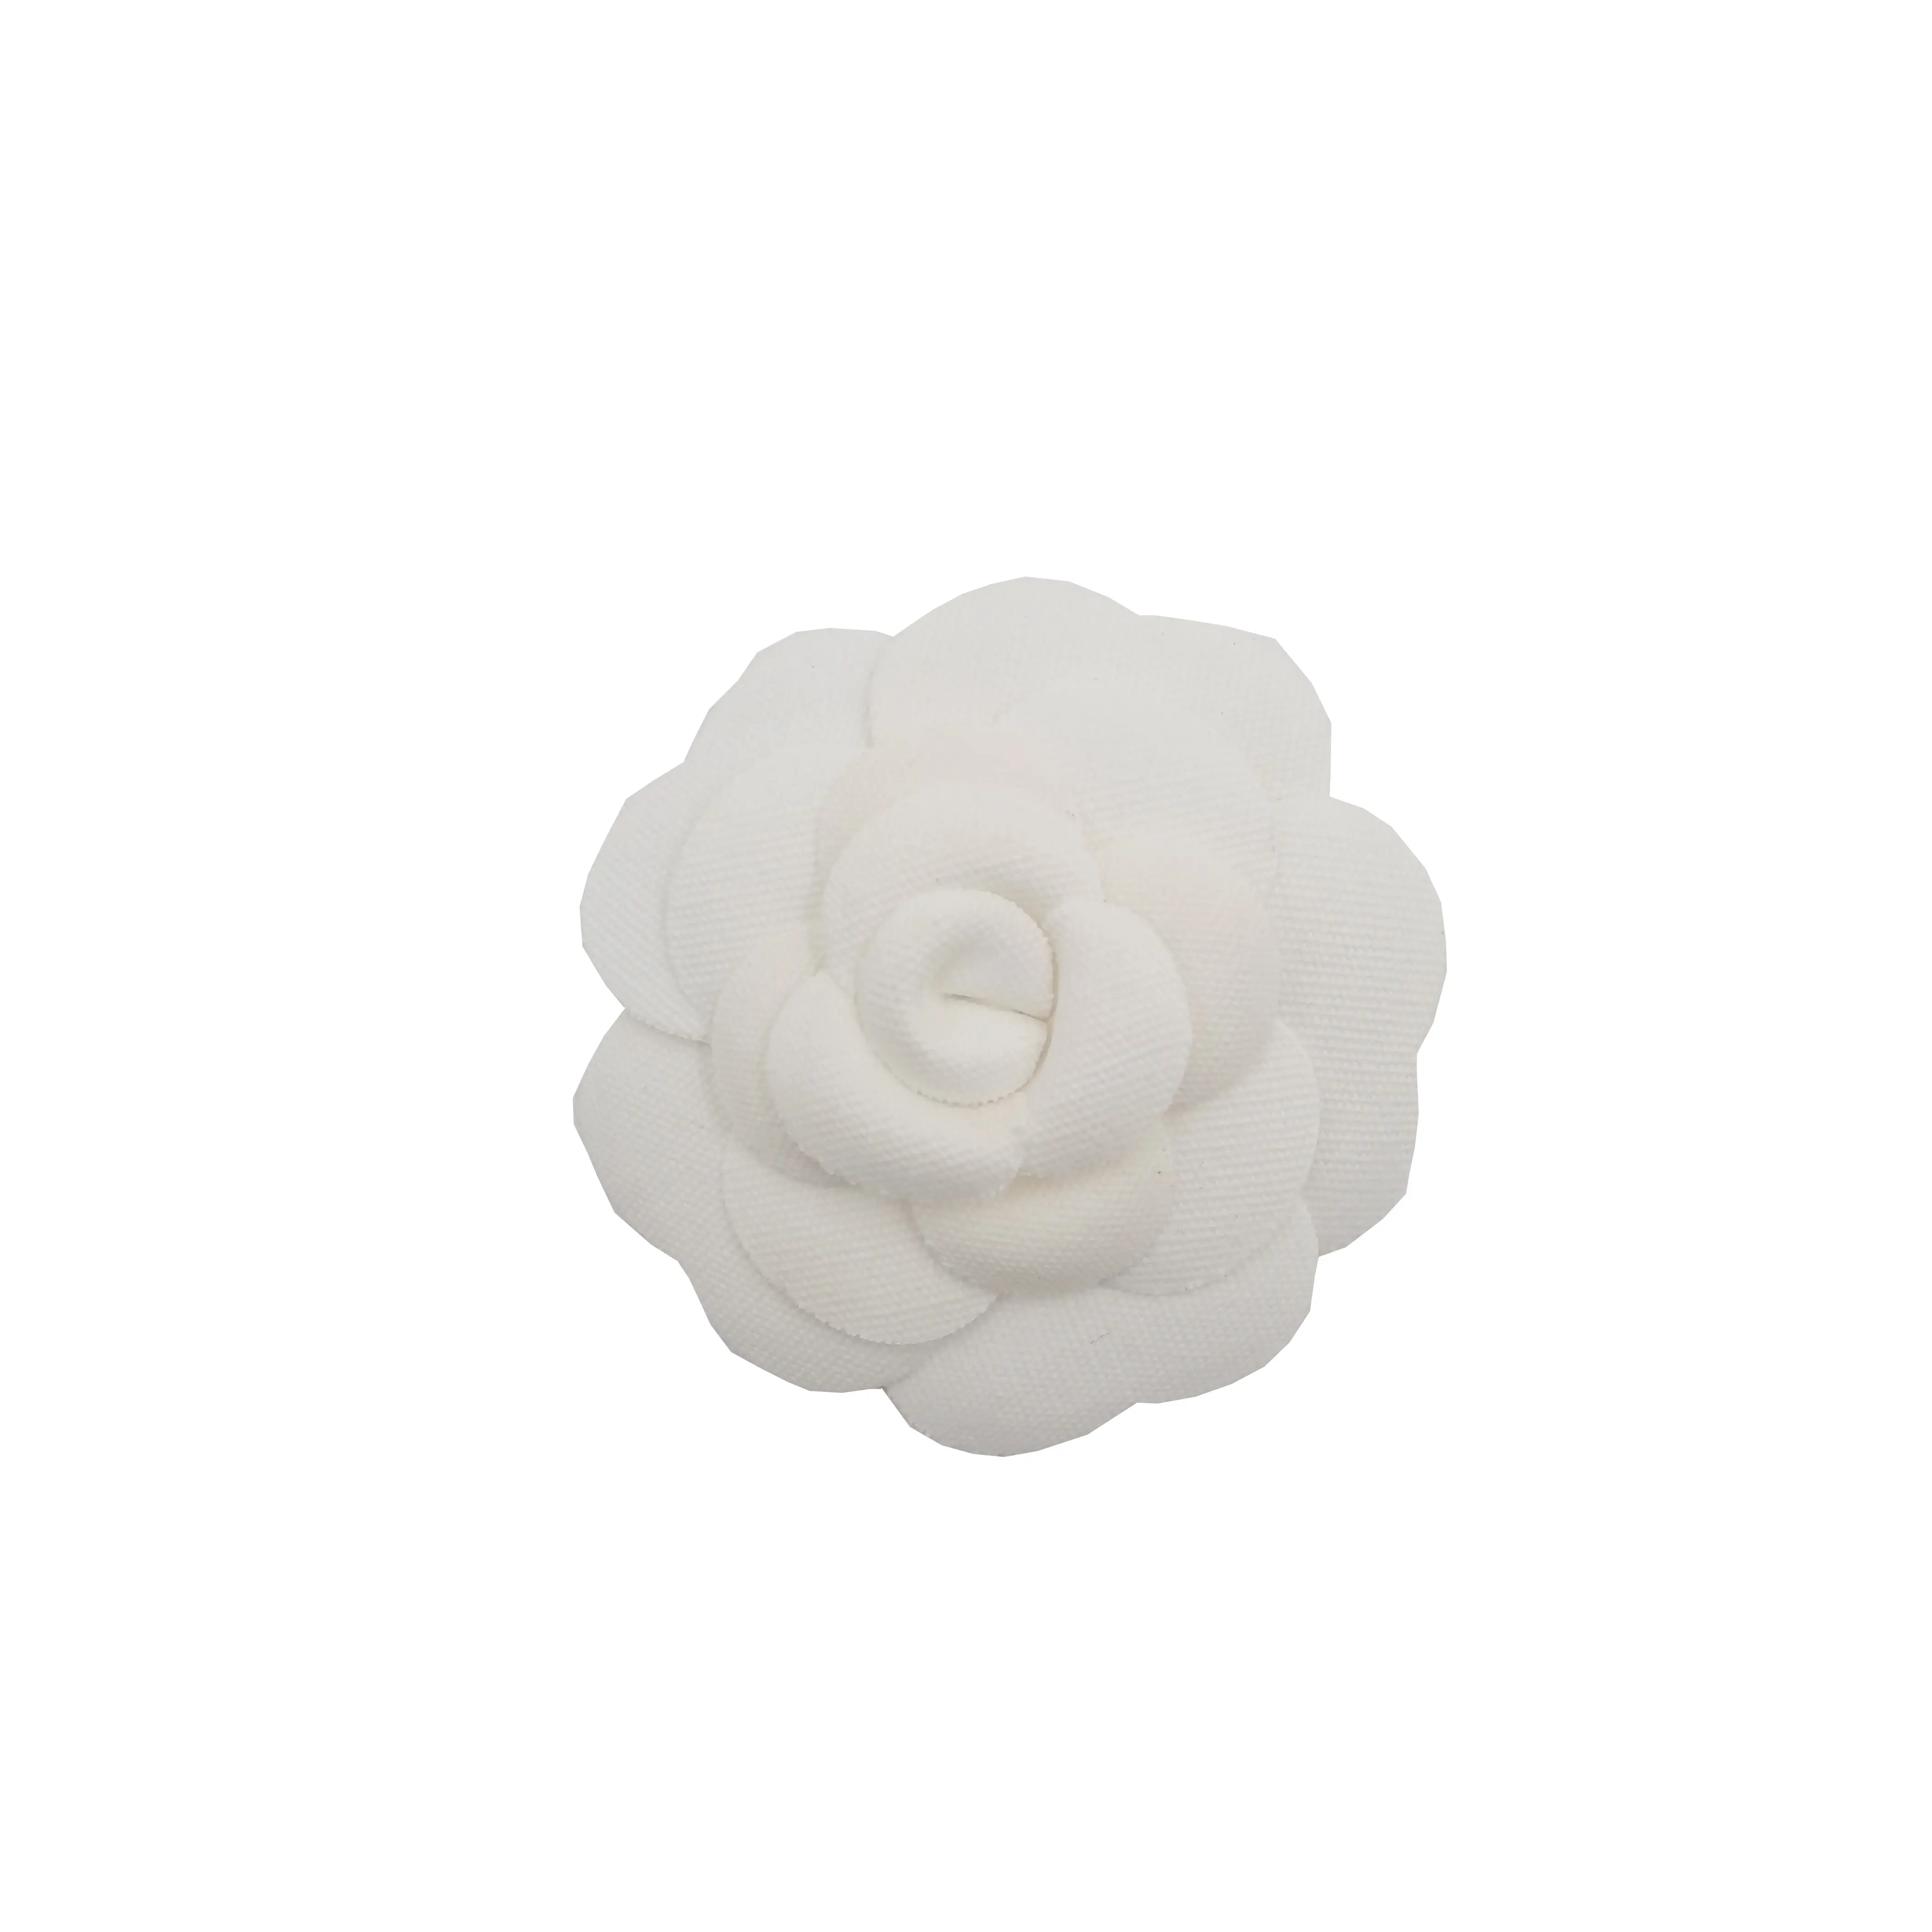 6.5cm handmade vintage white cotton canvas camellia flower for box decoration or wedding with back glue